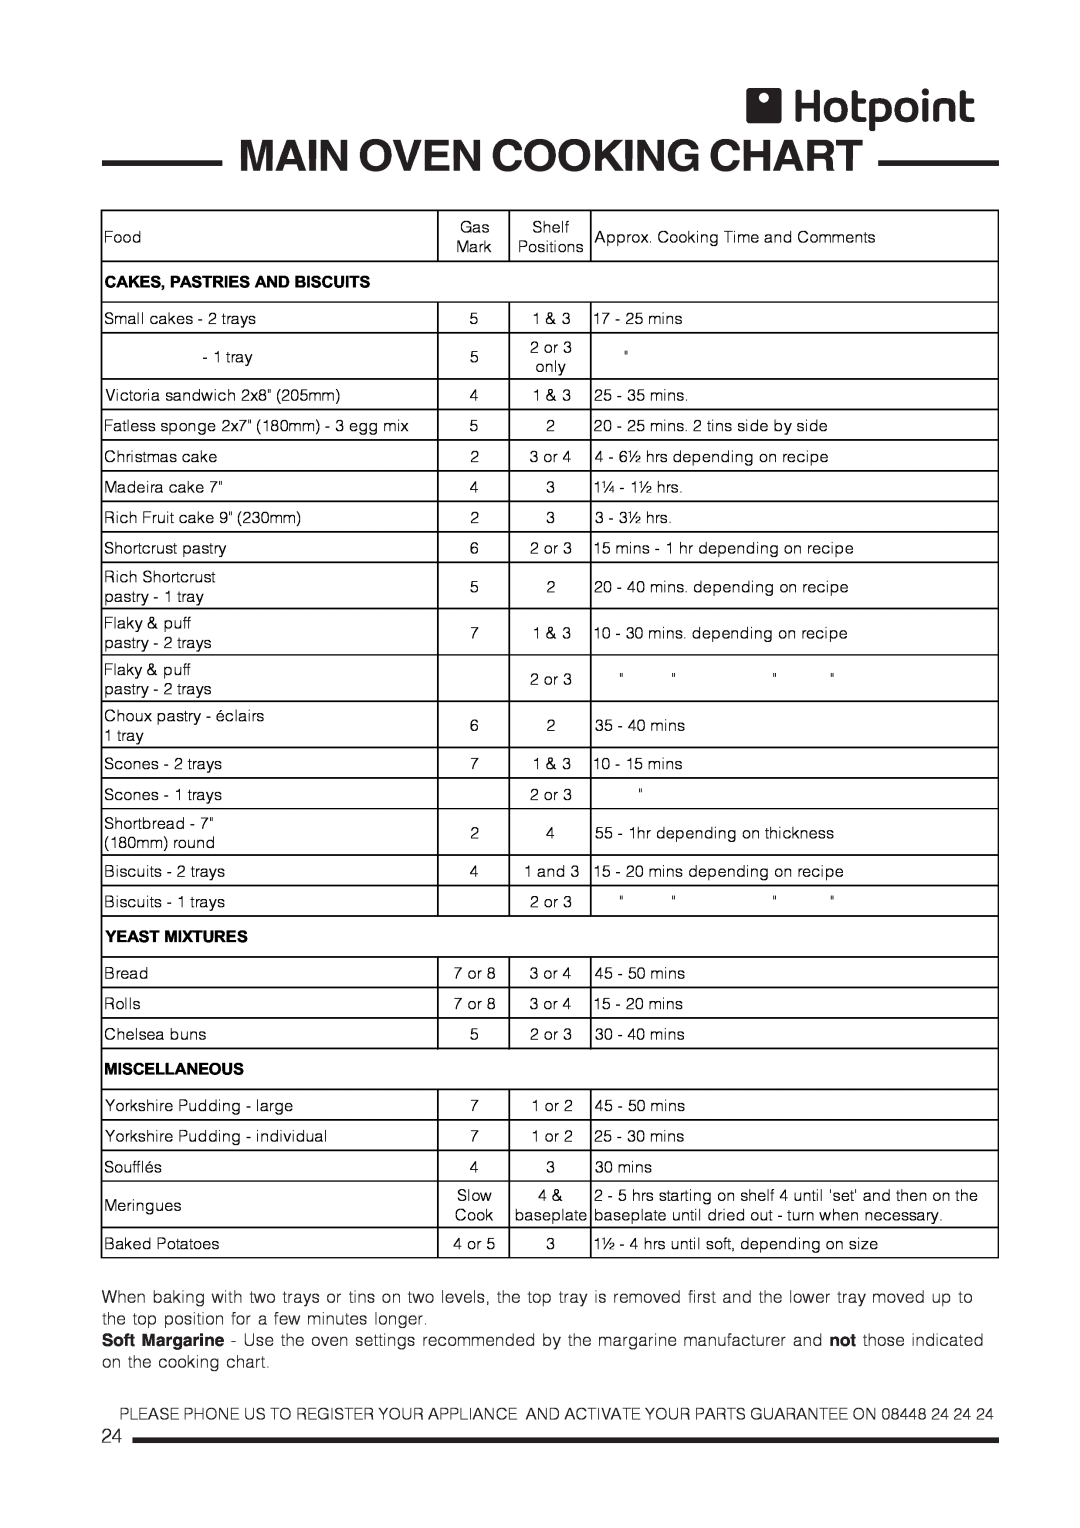 Hotpoint ch60gpcf, ch60gpxf installation instructions Main Oven Cooking Chart 